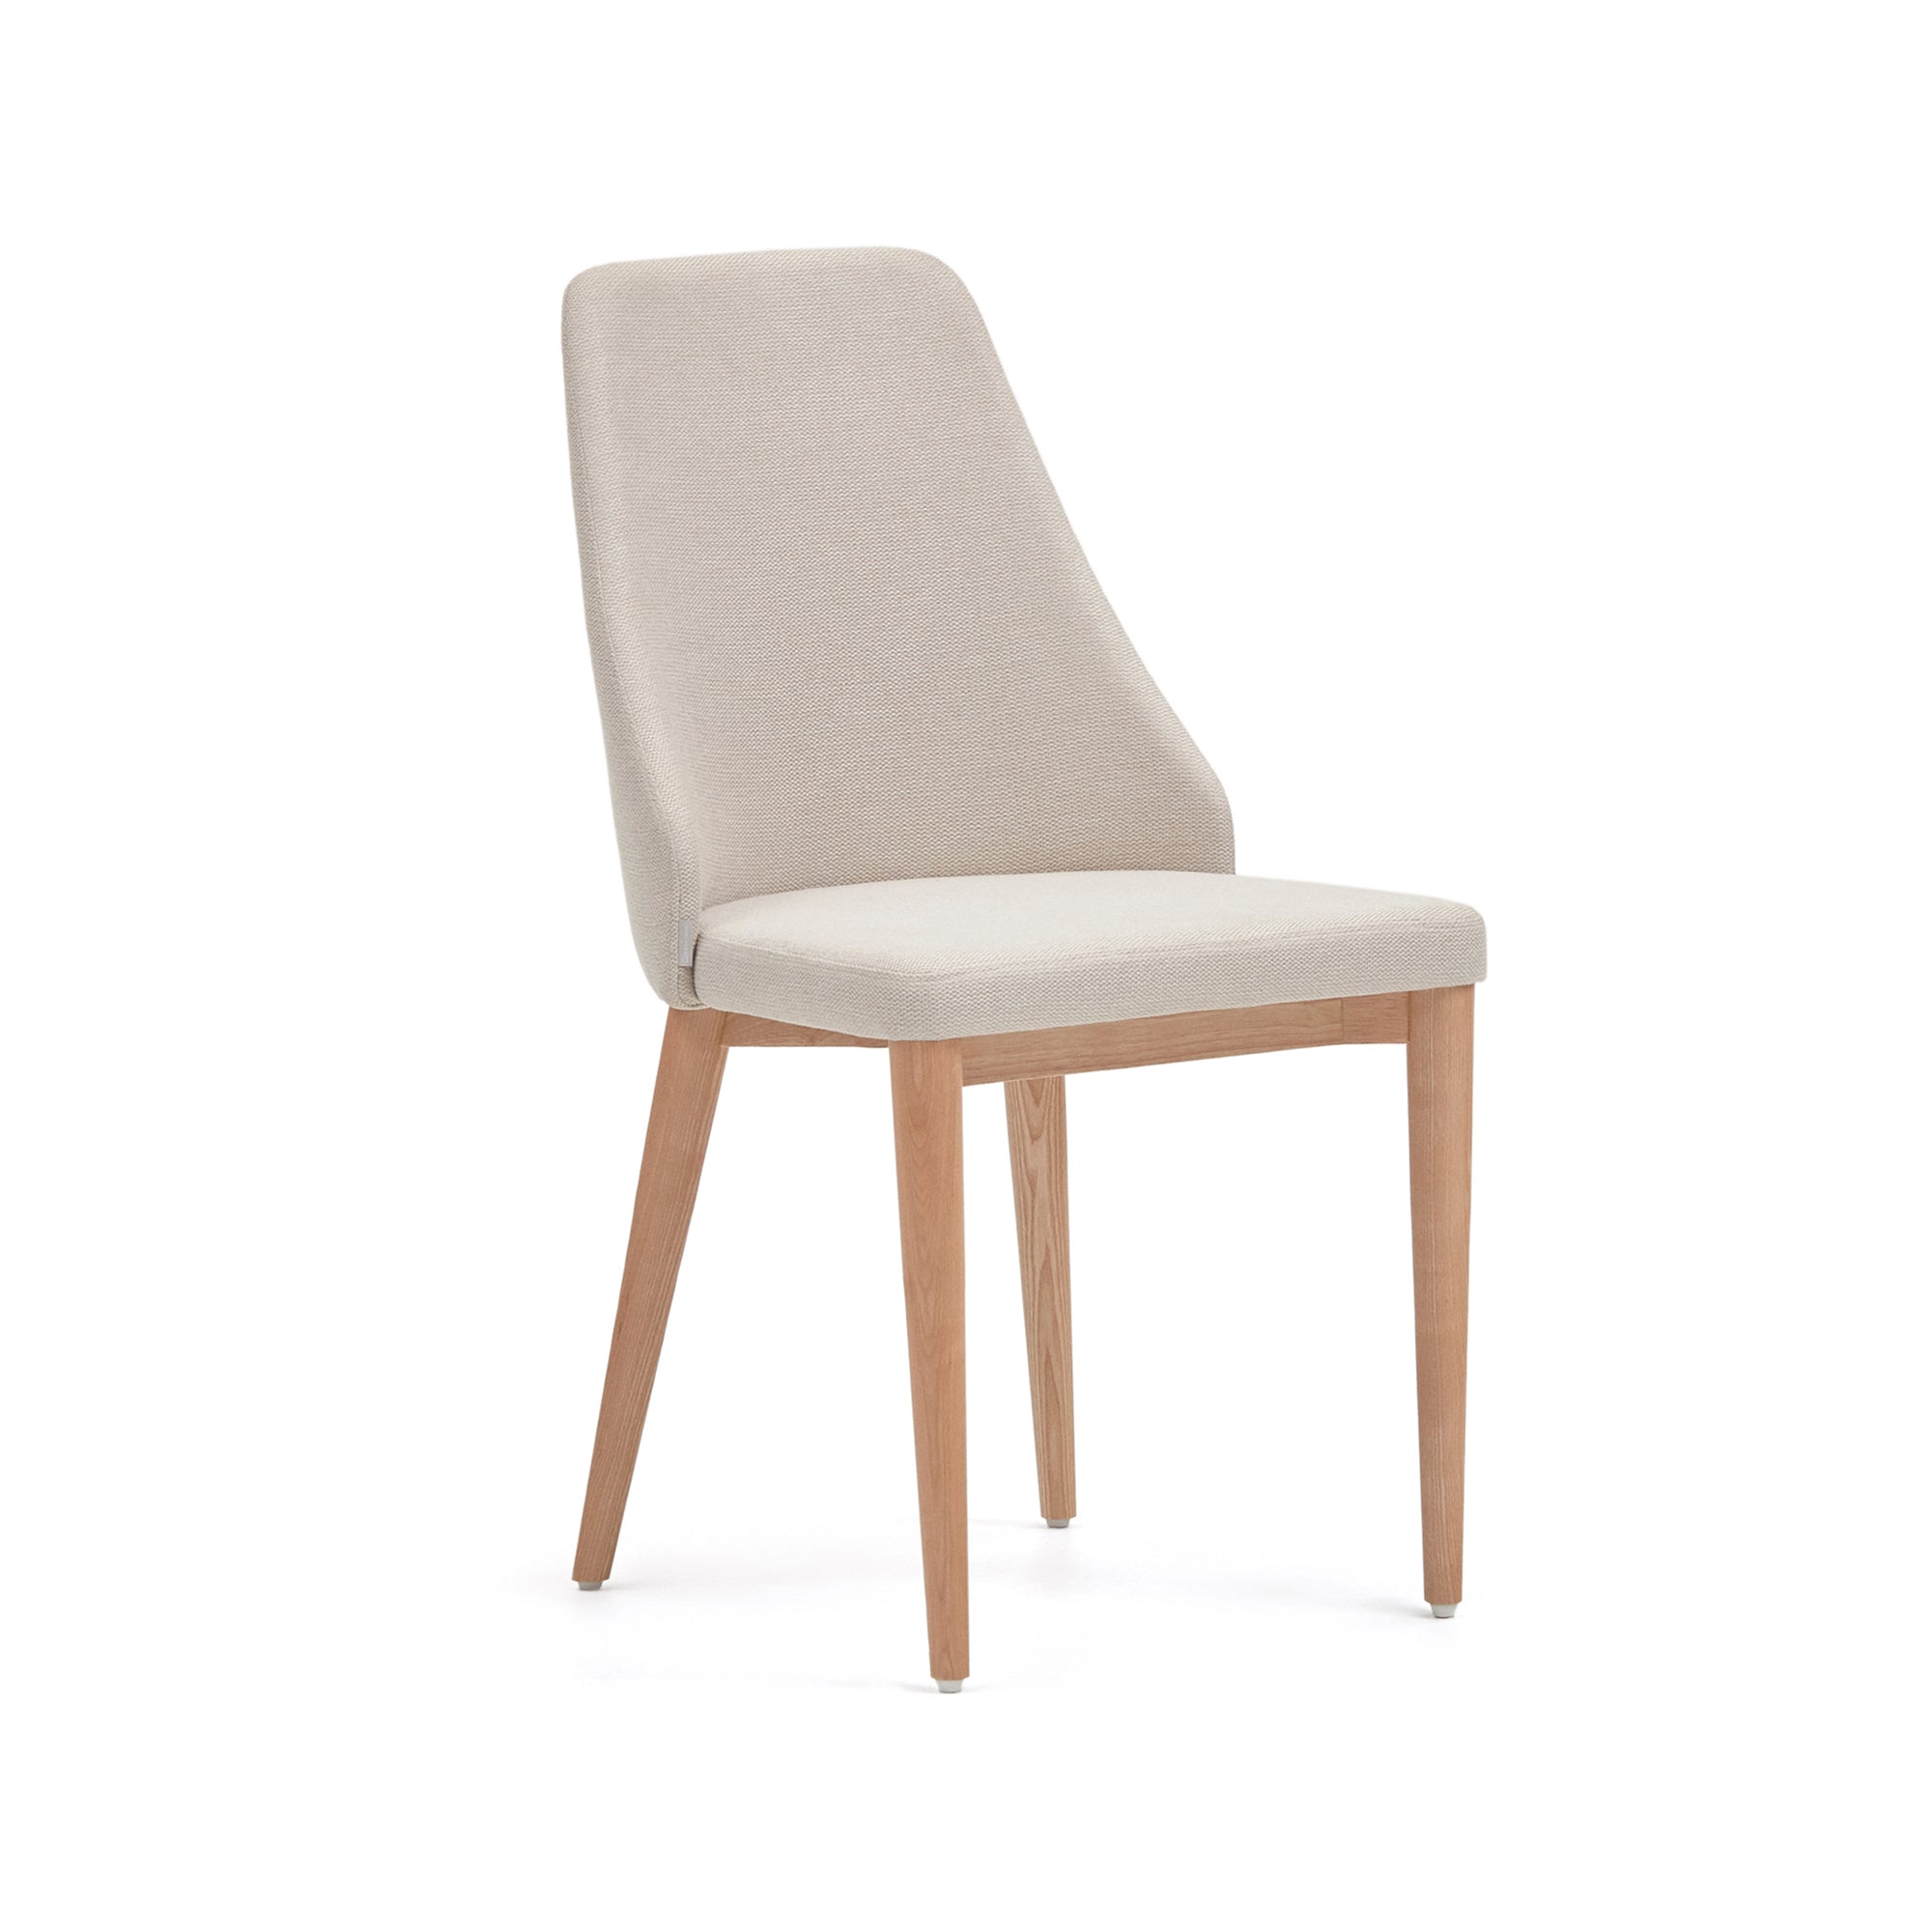 Rosie chair in beige chenille with solid ash wood legs in a natural finish